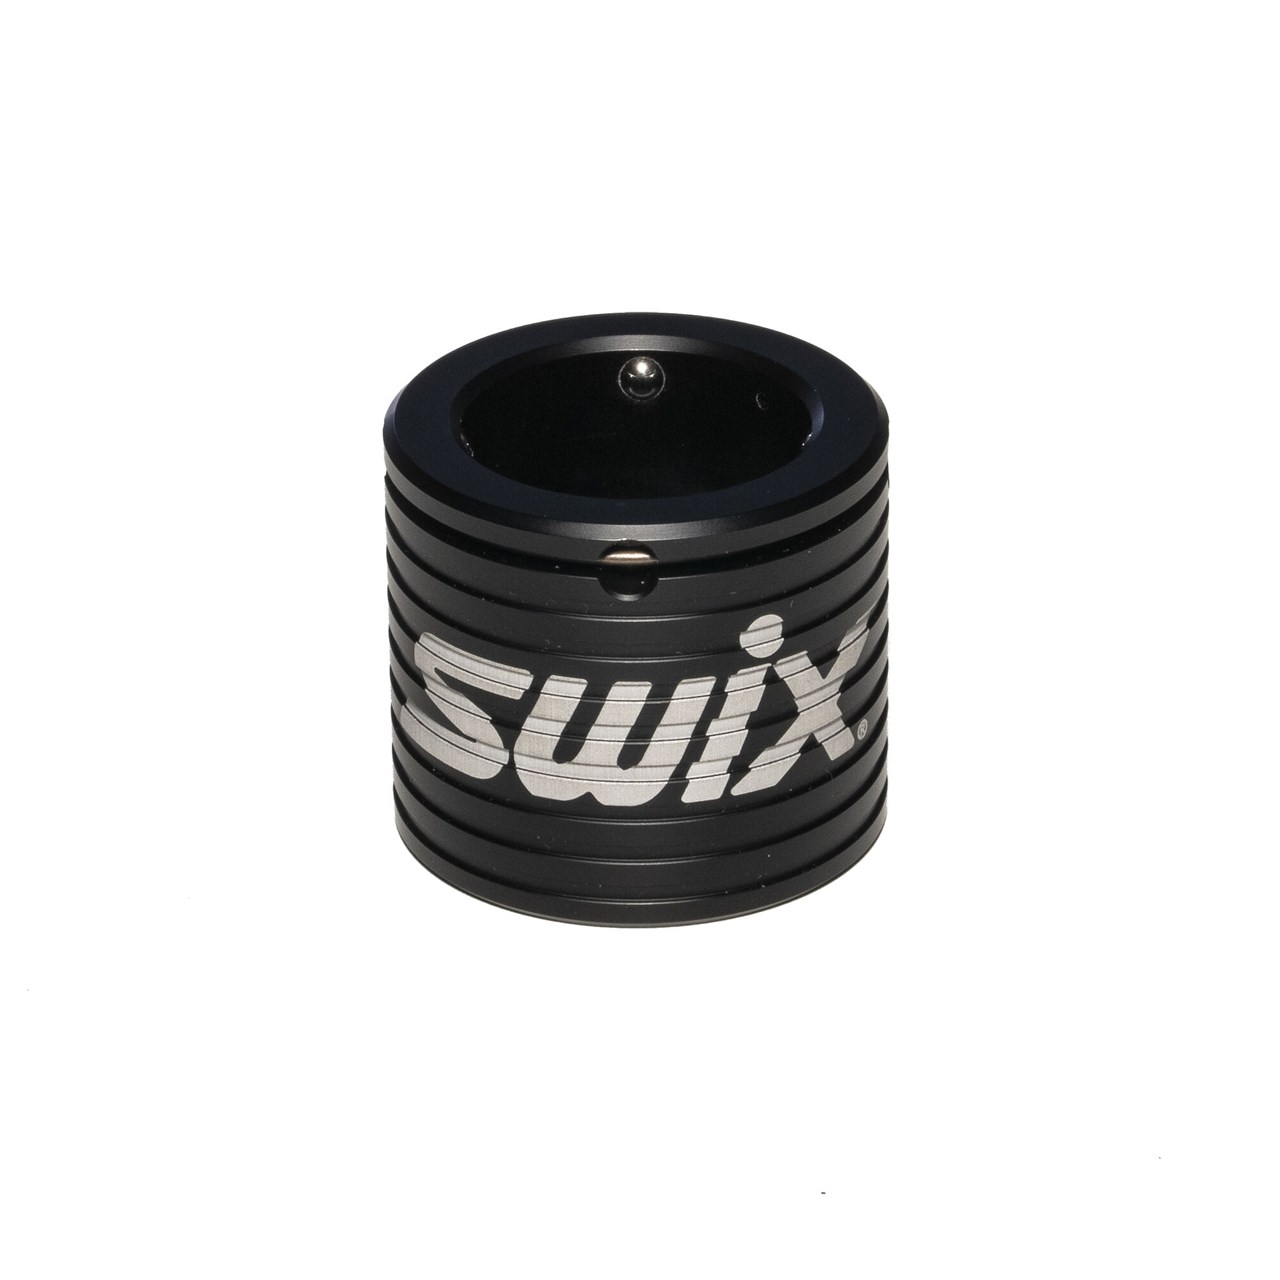 SWIX Snap lock for suction system